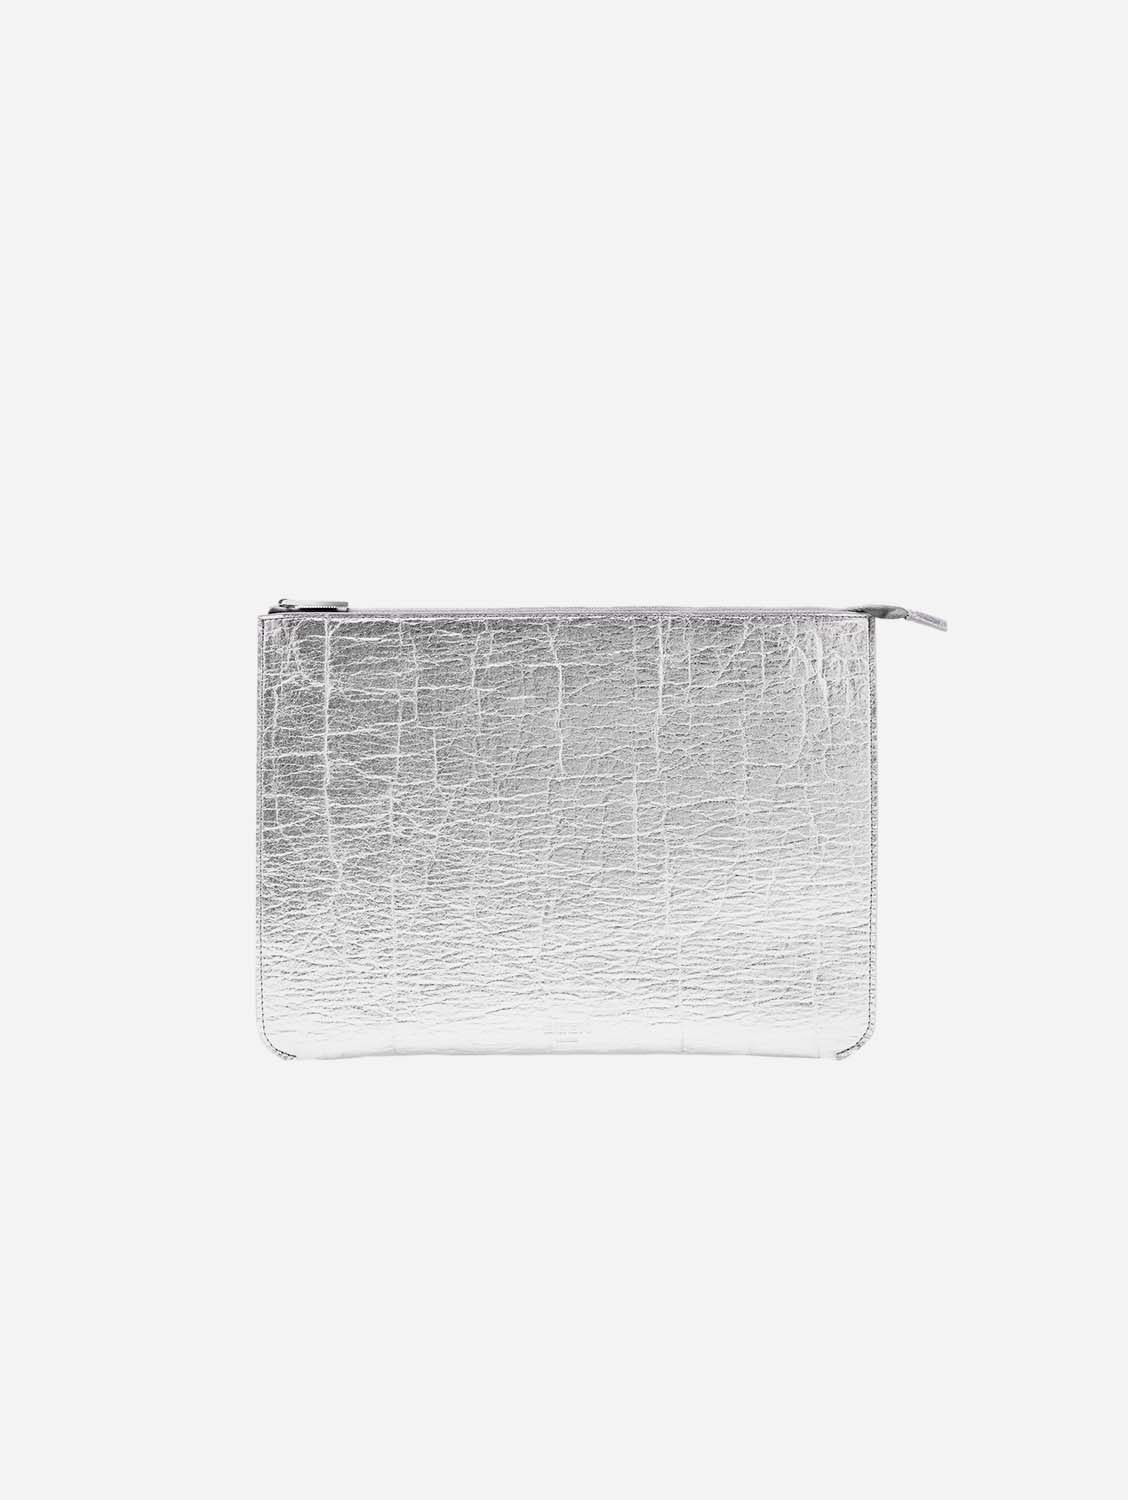 BEEN London Martello Pineapple Leather Laptop Case | Silver Silver